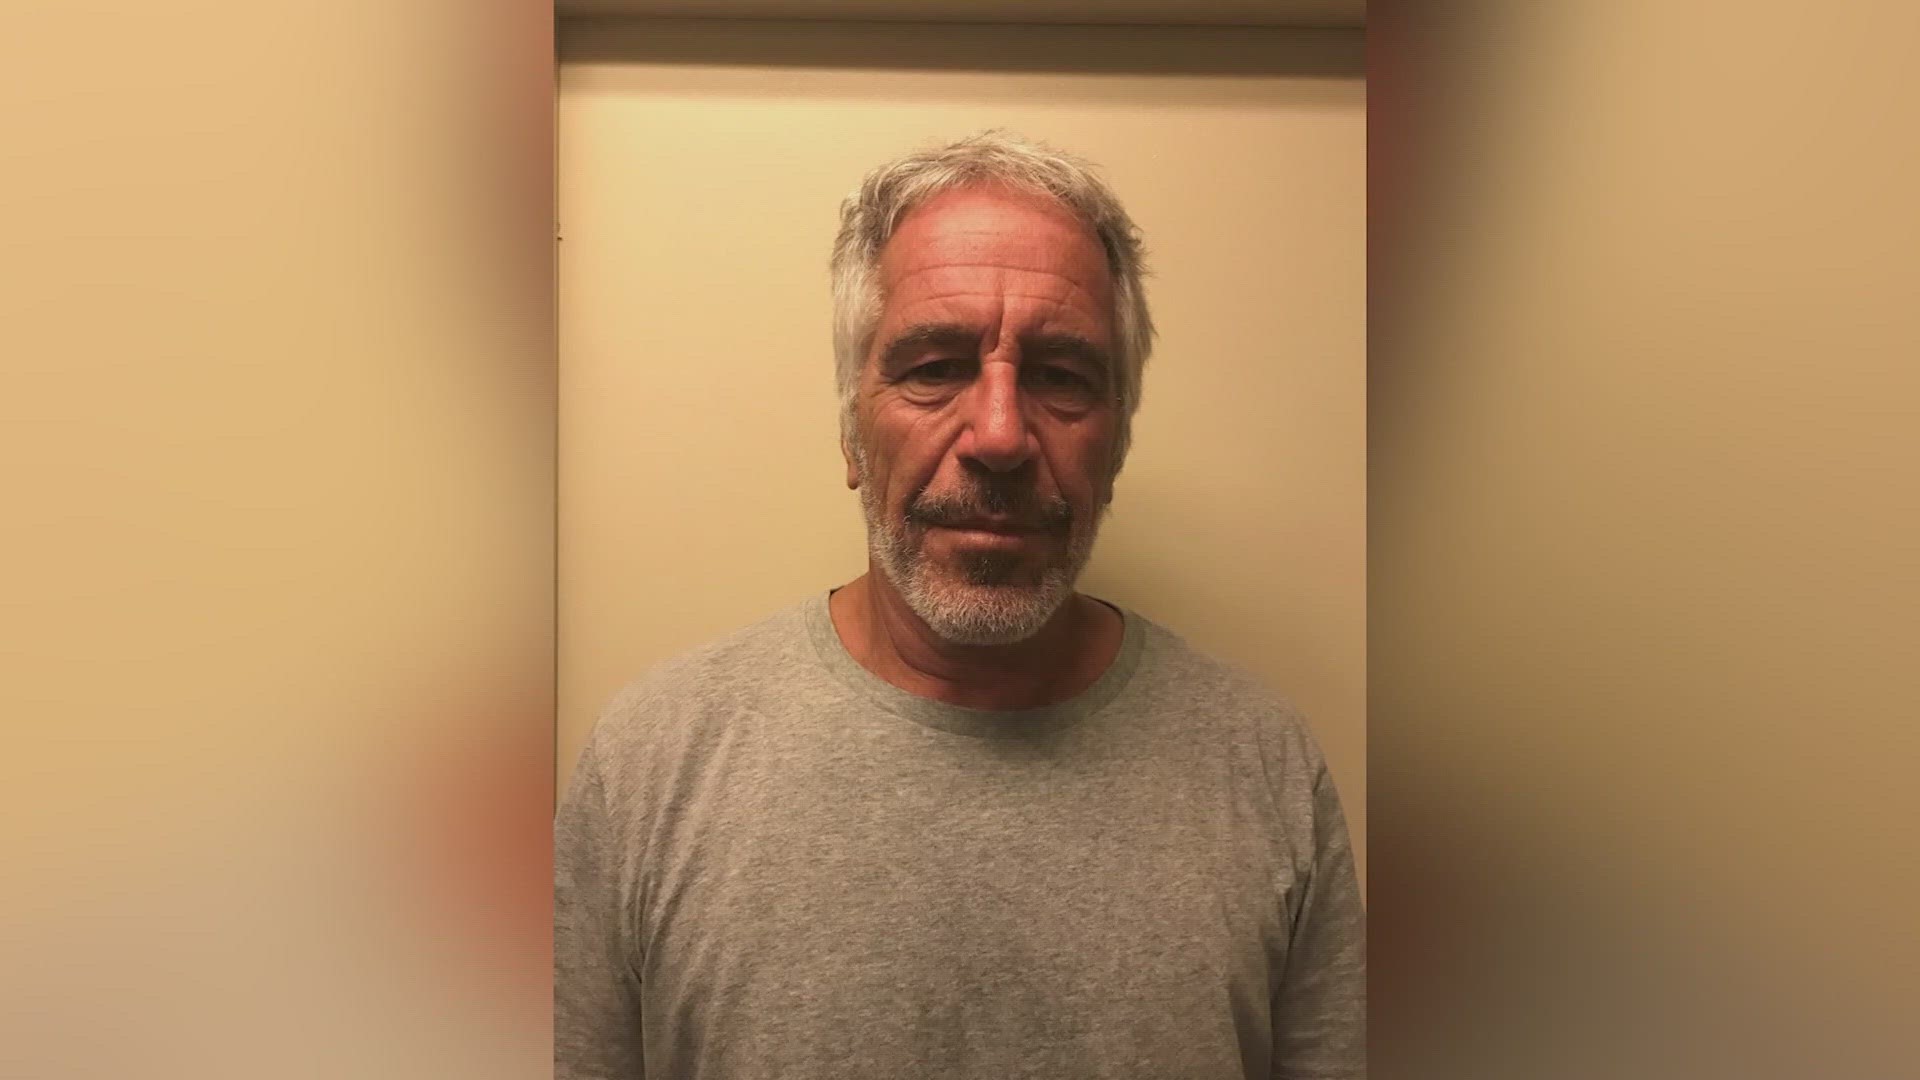 The new documents relate to a 2015 defamation lawsuit. In total, almost 200 names of Epstein's accusers, celebrities and politicians are mentioned in the four docs.